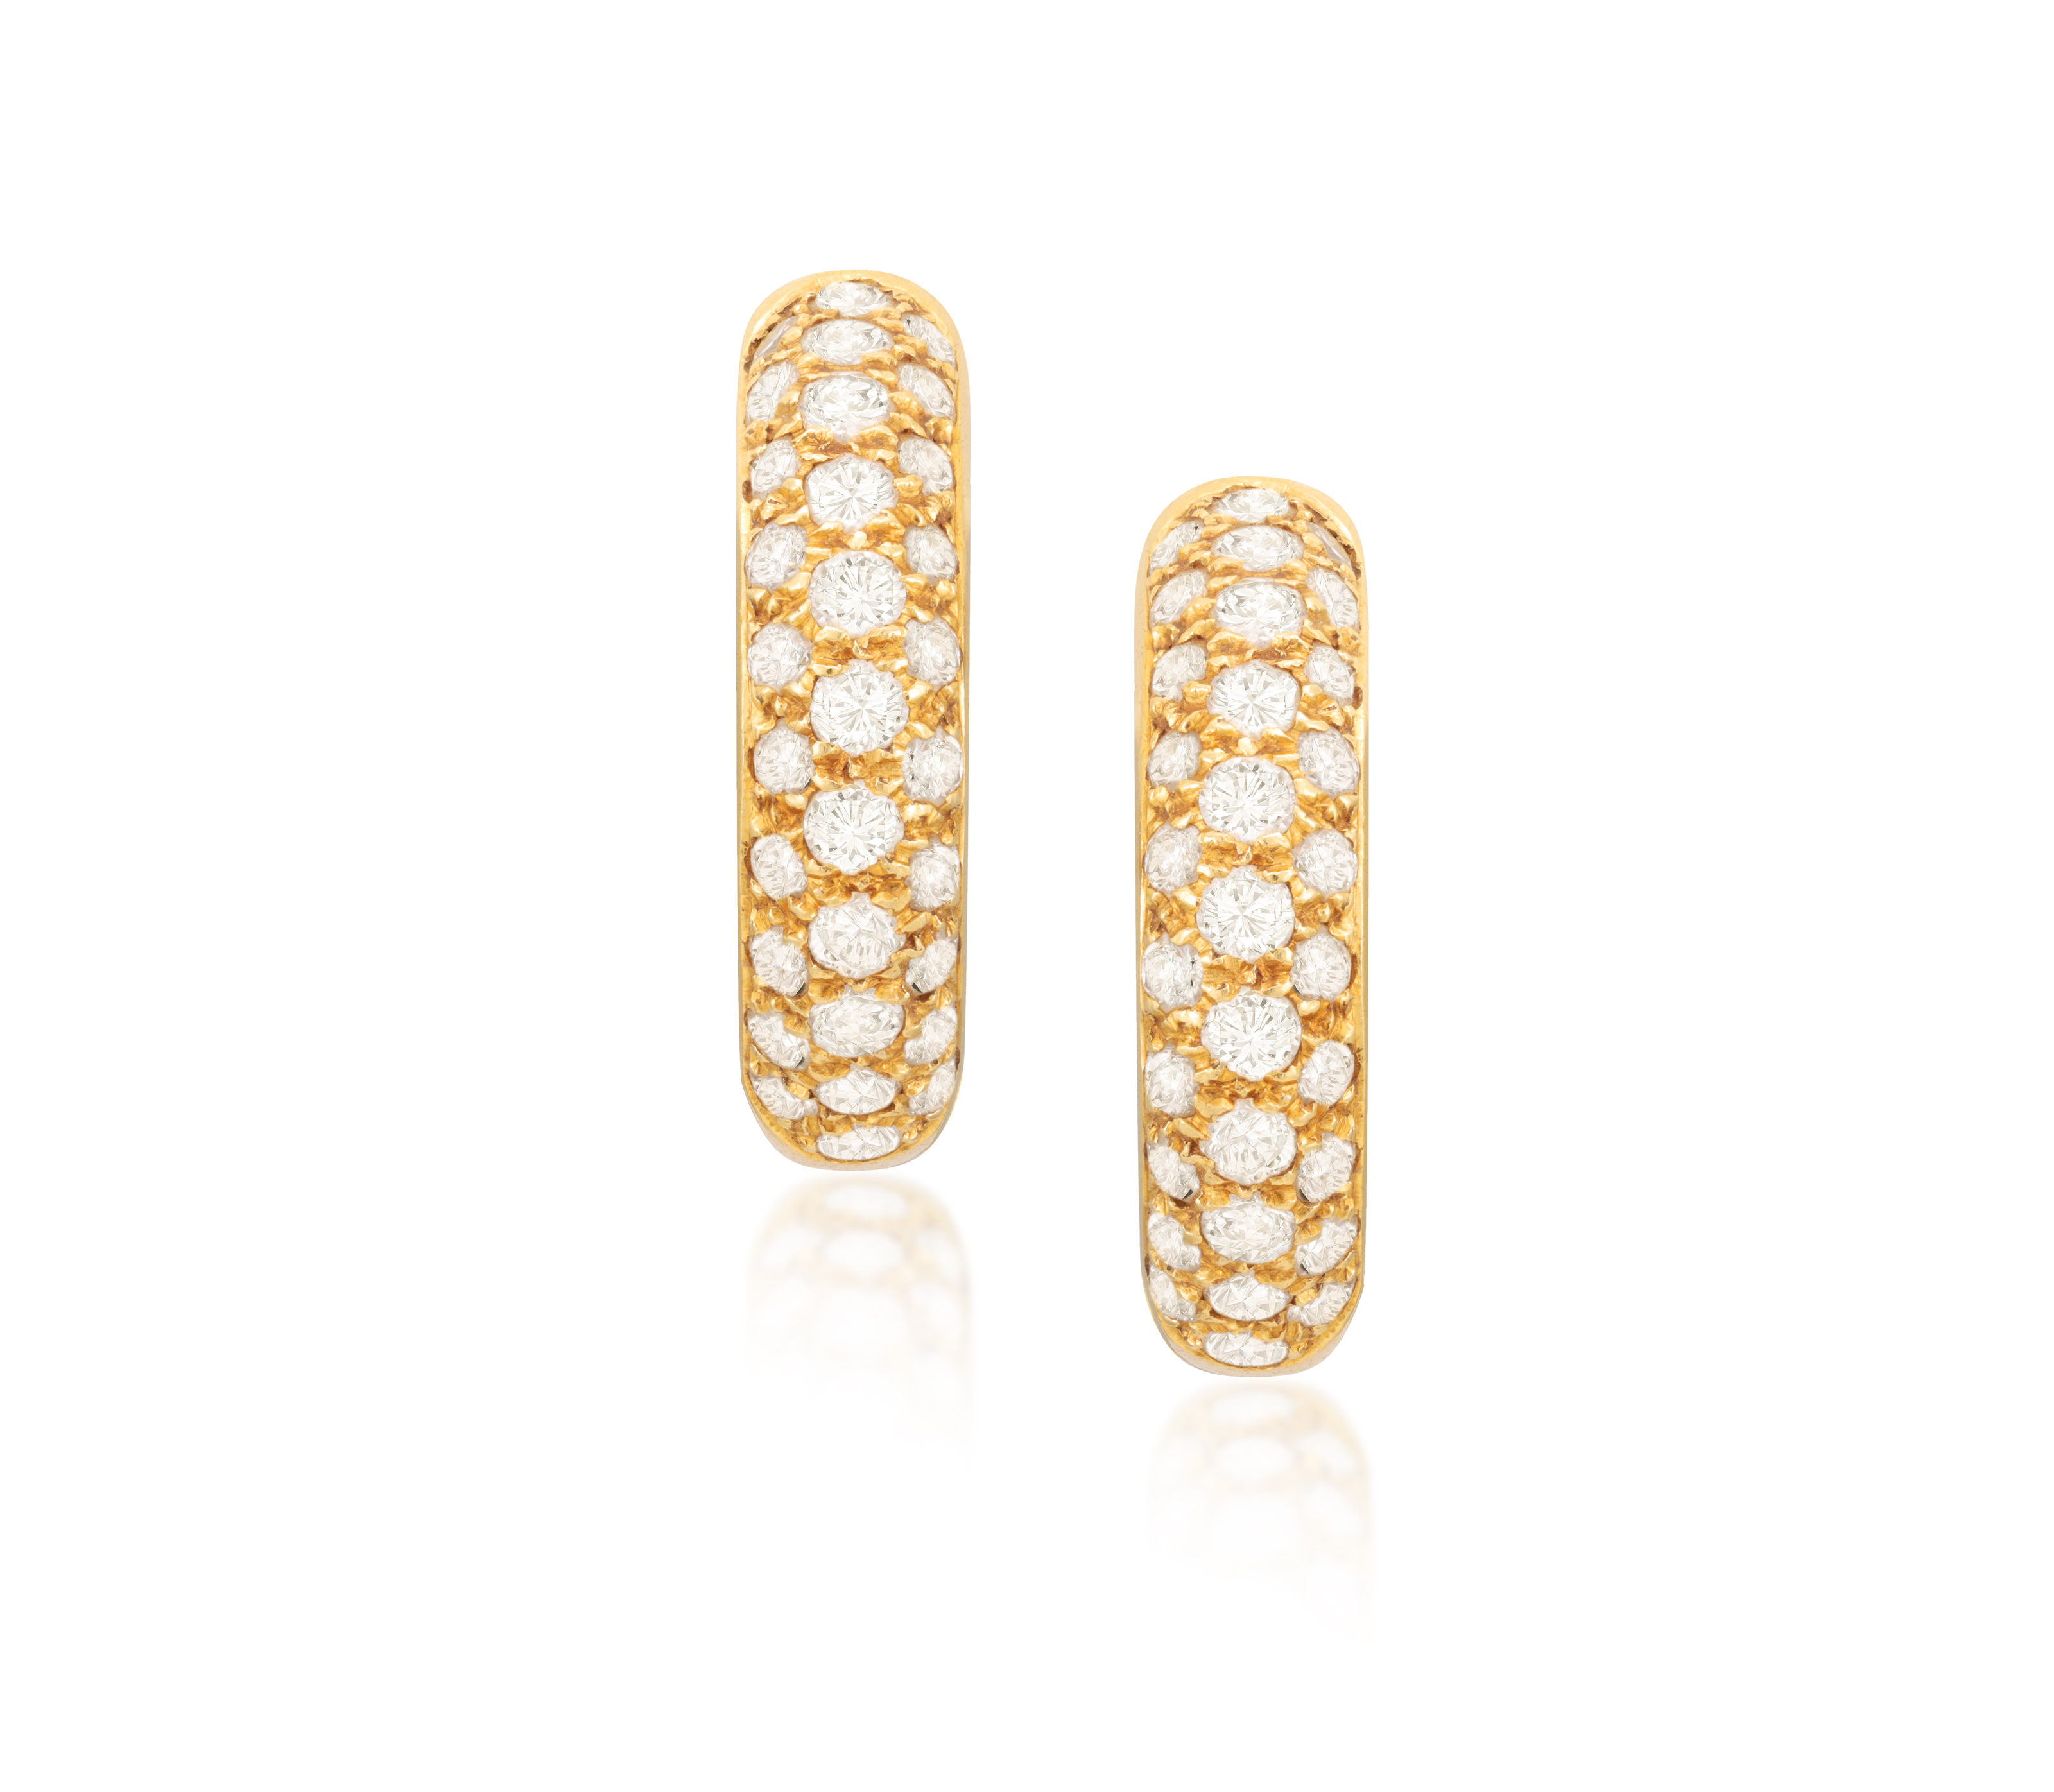 A PAIR OF DIAMOND HOOP EARRINGS Each frontispiece pavé-set with brilliant-cut diamonds, mounted in - Image 2 of 3